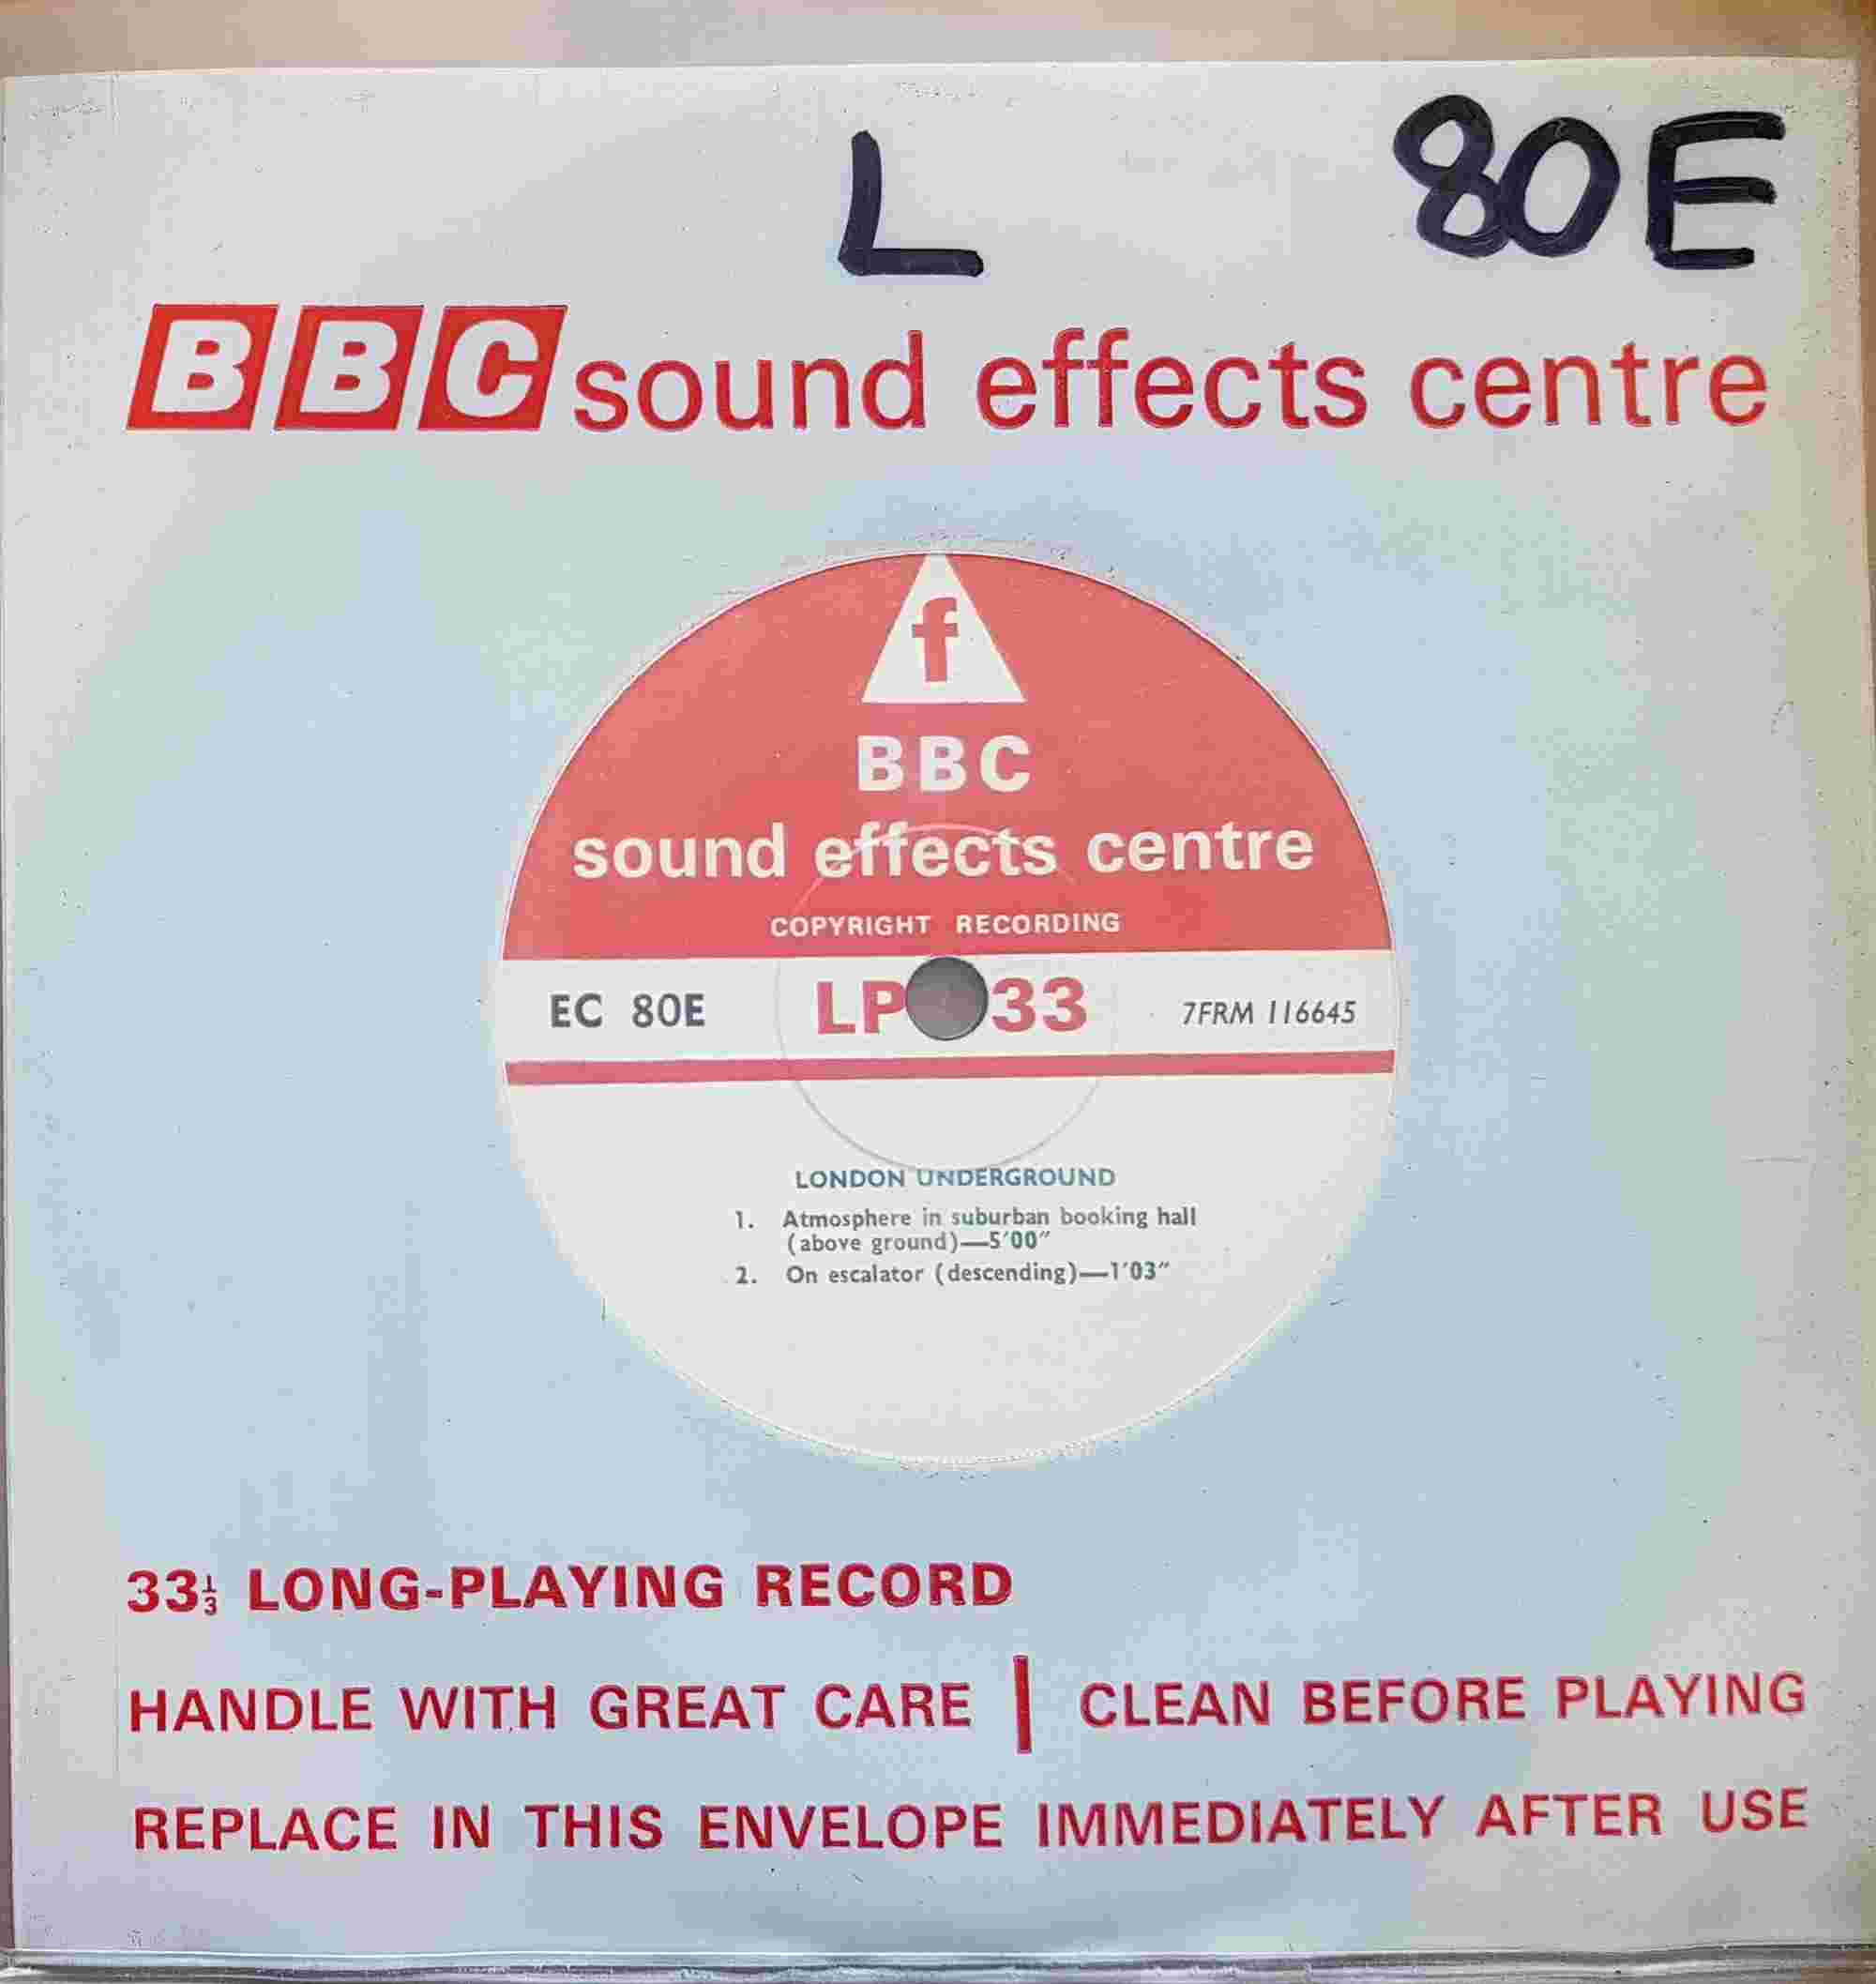 Picture of EC 80E London Underground by artist Not registered from the BBC singles - Records and Tapes library